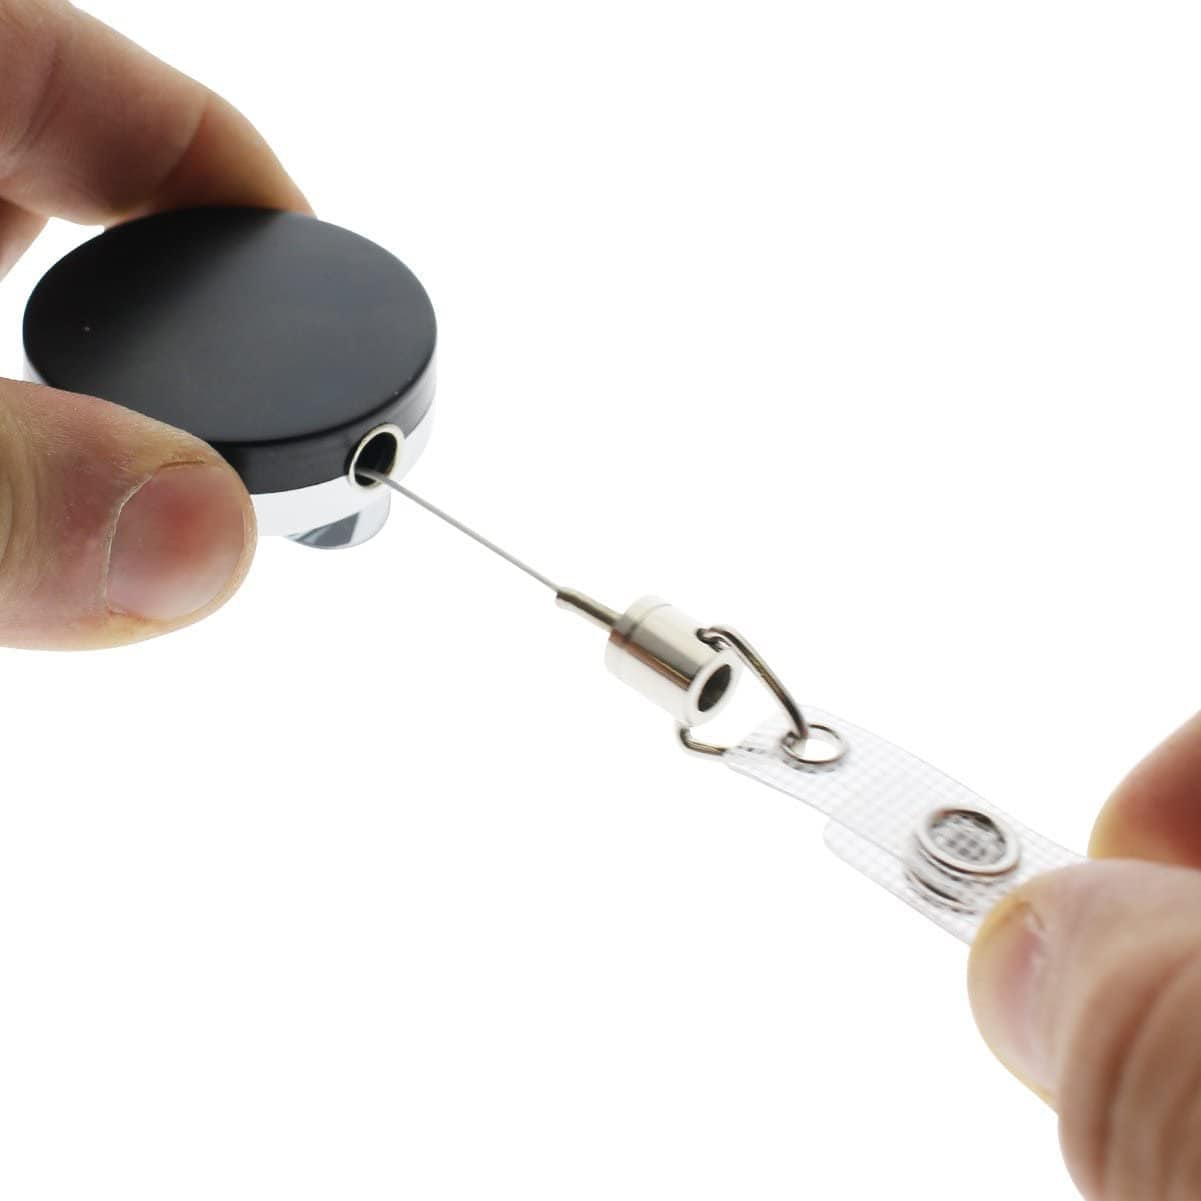 Hands holding a Heavy Duty Badge Reel With Steel Cable 2120-3305 with a black top and a metal cord being pulled out.